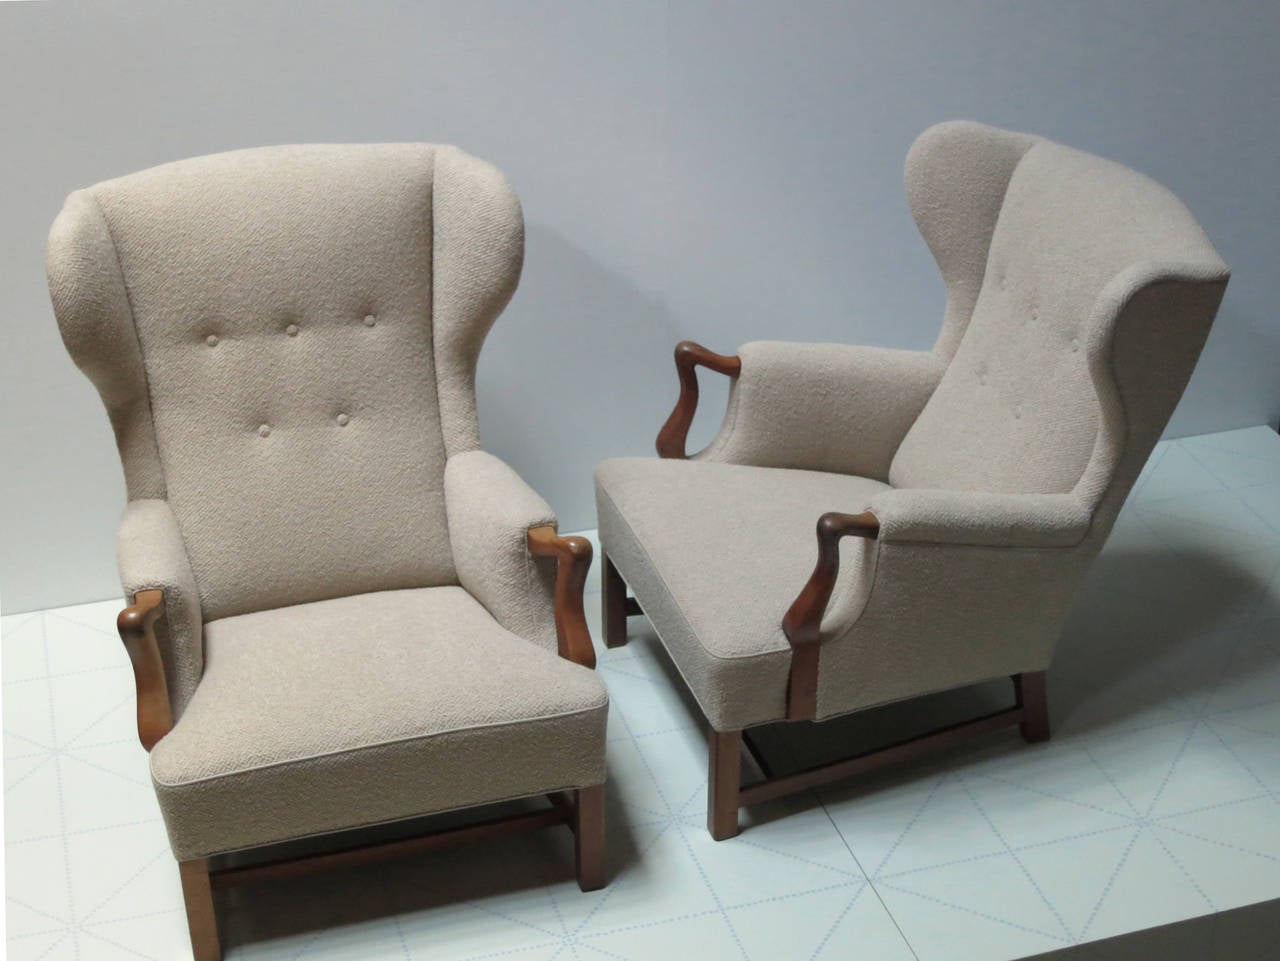 These generous and comfortable chairs were made in the 1940s by master cabinetmaker and designer Jacob Kjær. The seats and seat backs are fully sprung and have been newly upholstered in a cafe-au-lait colored nubby wool fabric. The hand carved